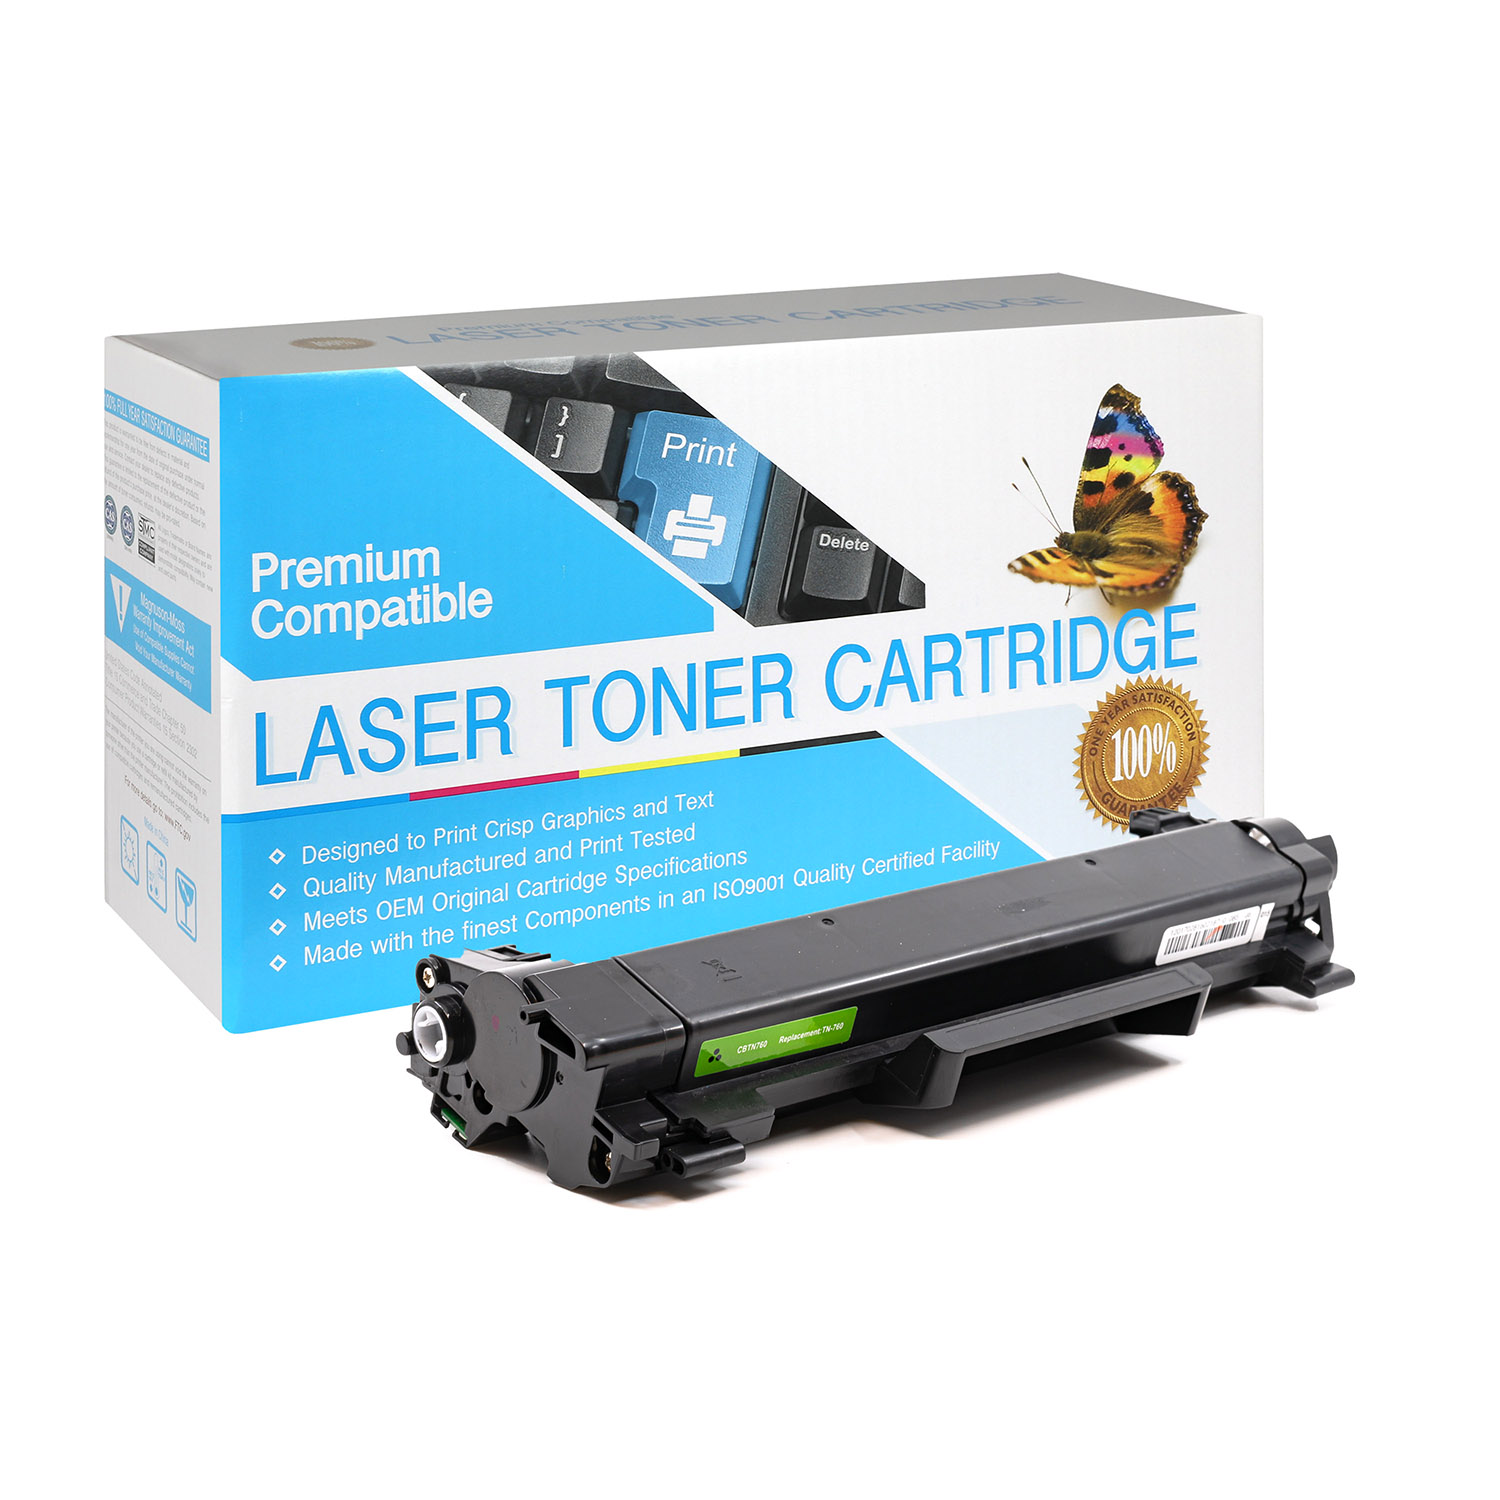 Brother TN-760 Black Toner Cartridge  INKONESTOP HIGH-QUALITY PRINTER INK  TONER CARTRIDGES FOR LESS!  save up 80% off retail price, 1  year warranty, Call 800-209-3013 order@